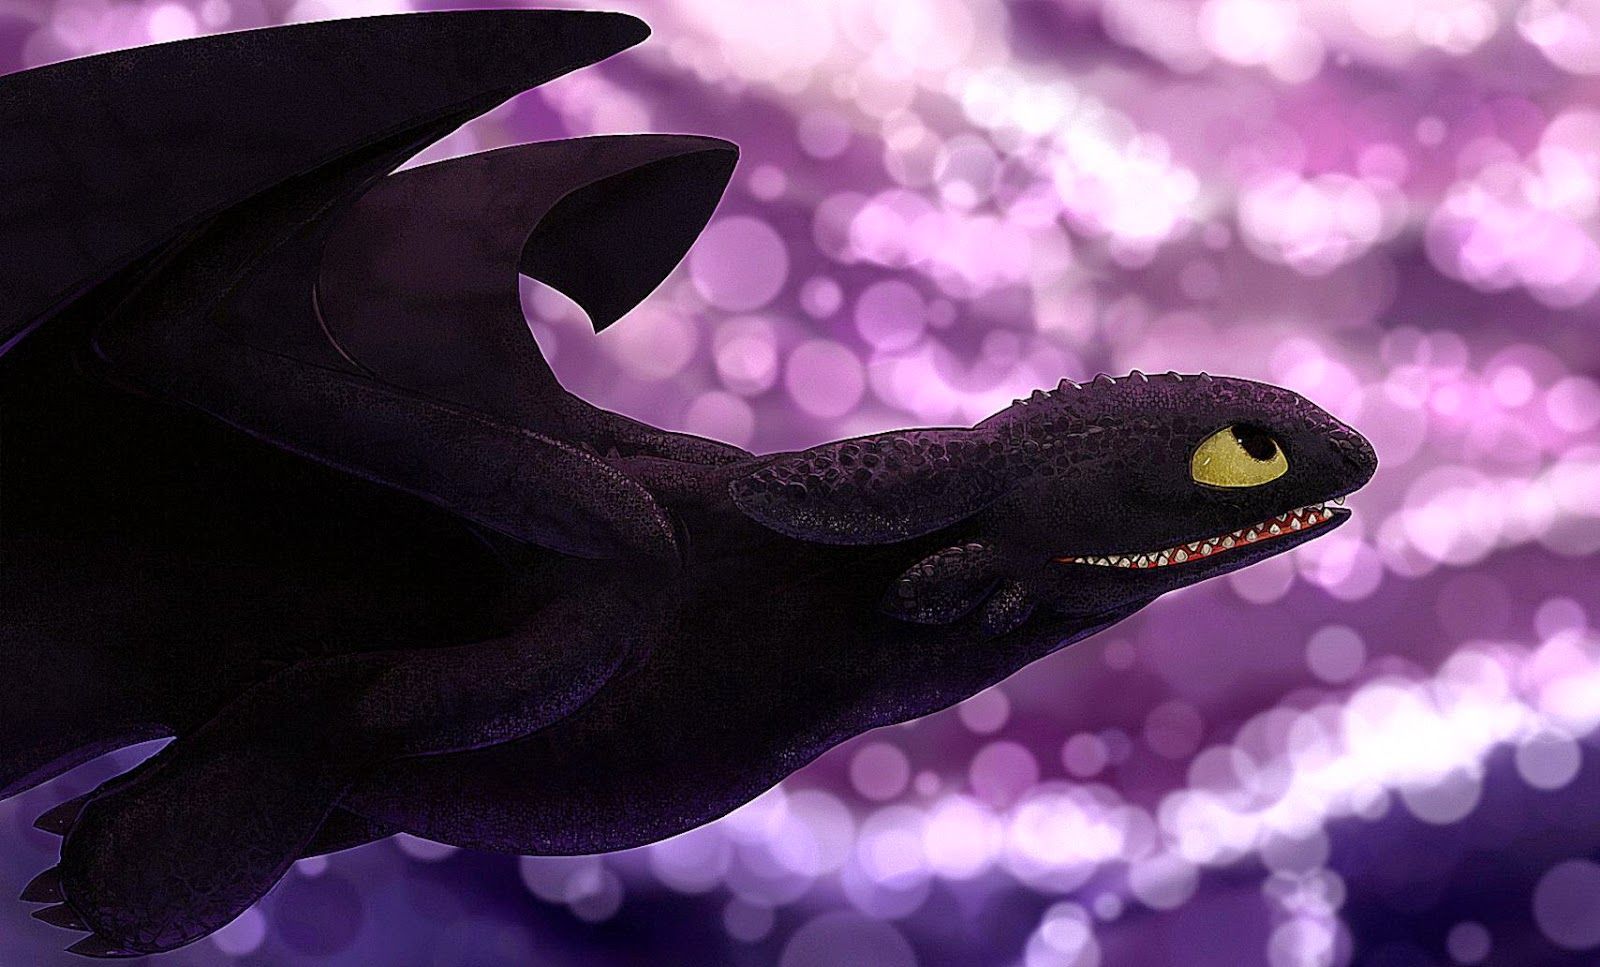 Cool HD Wallpaper: Toothless The Dragon Wallpaper